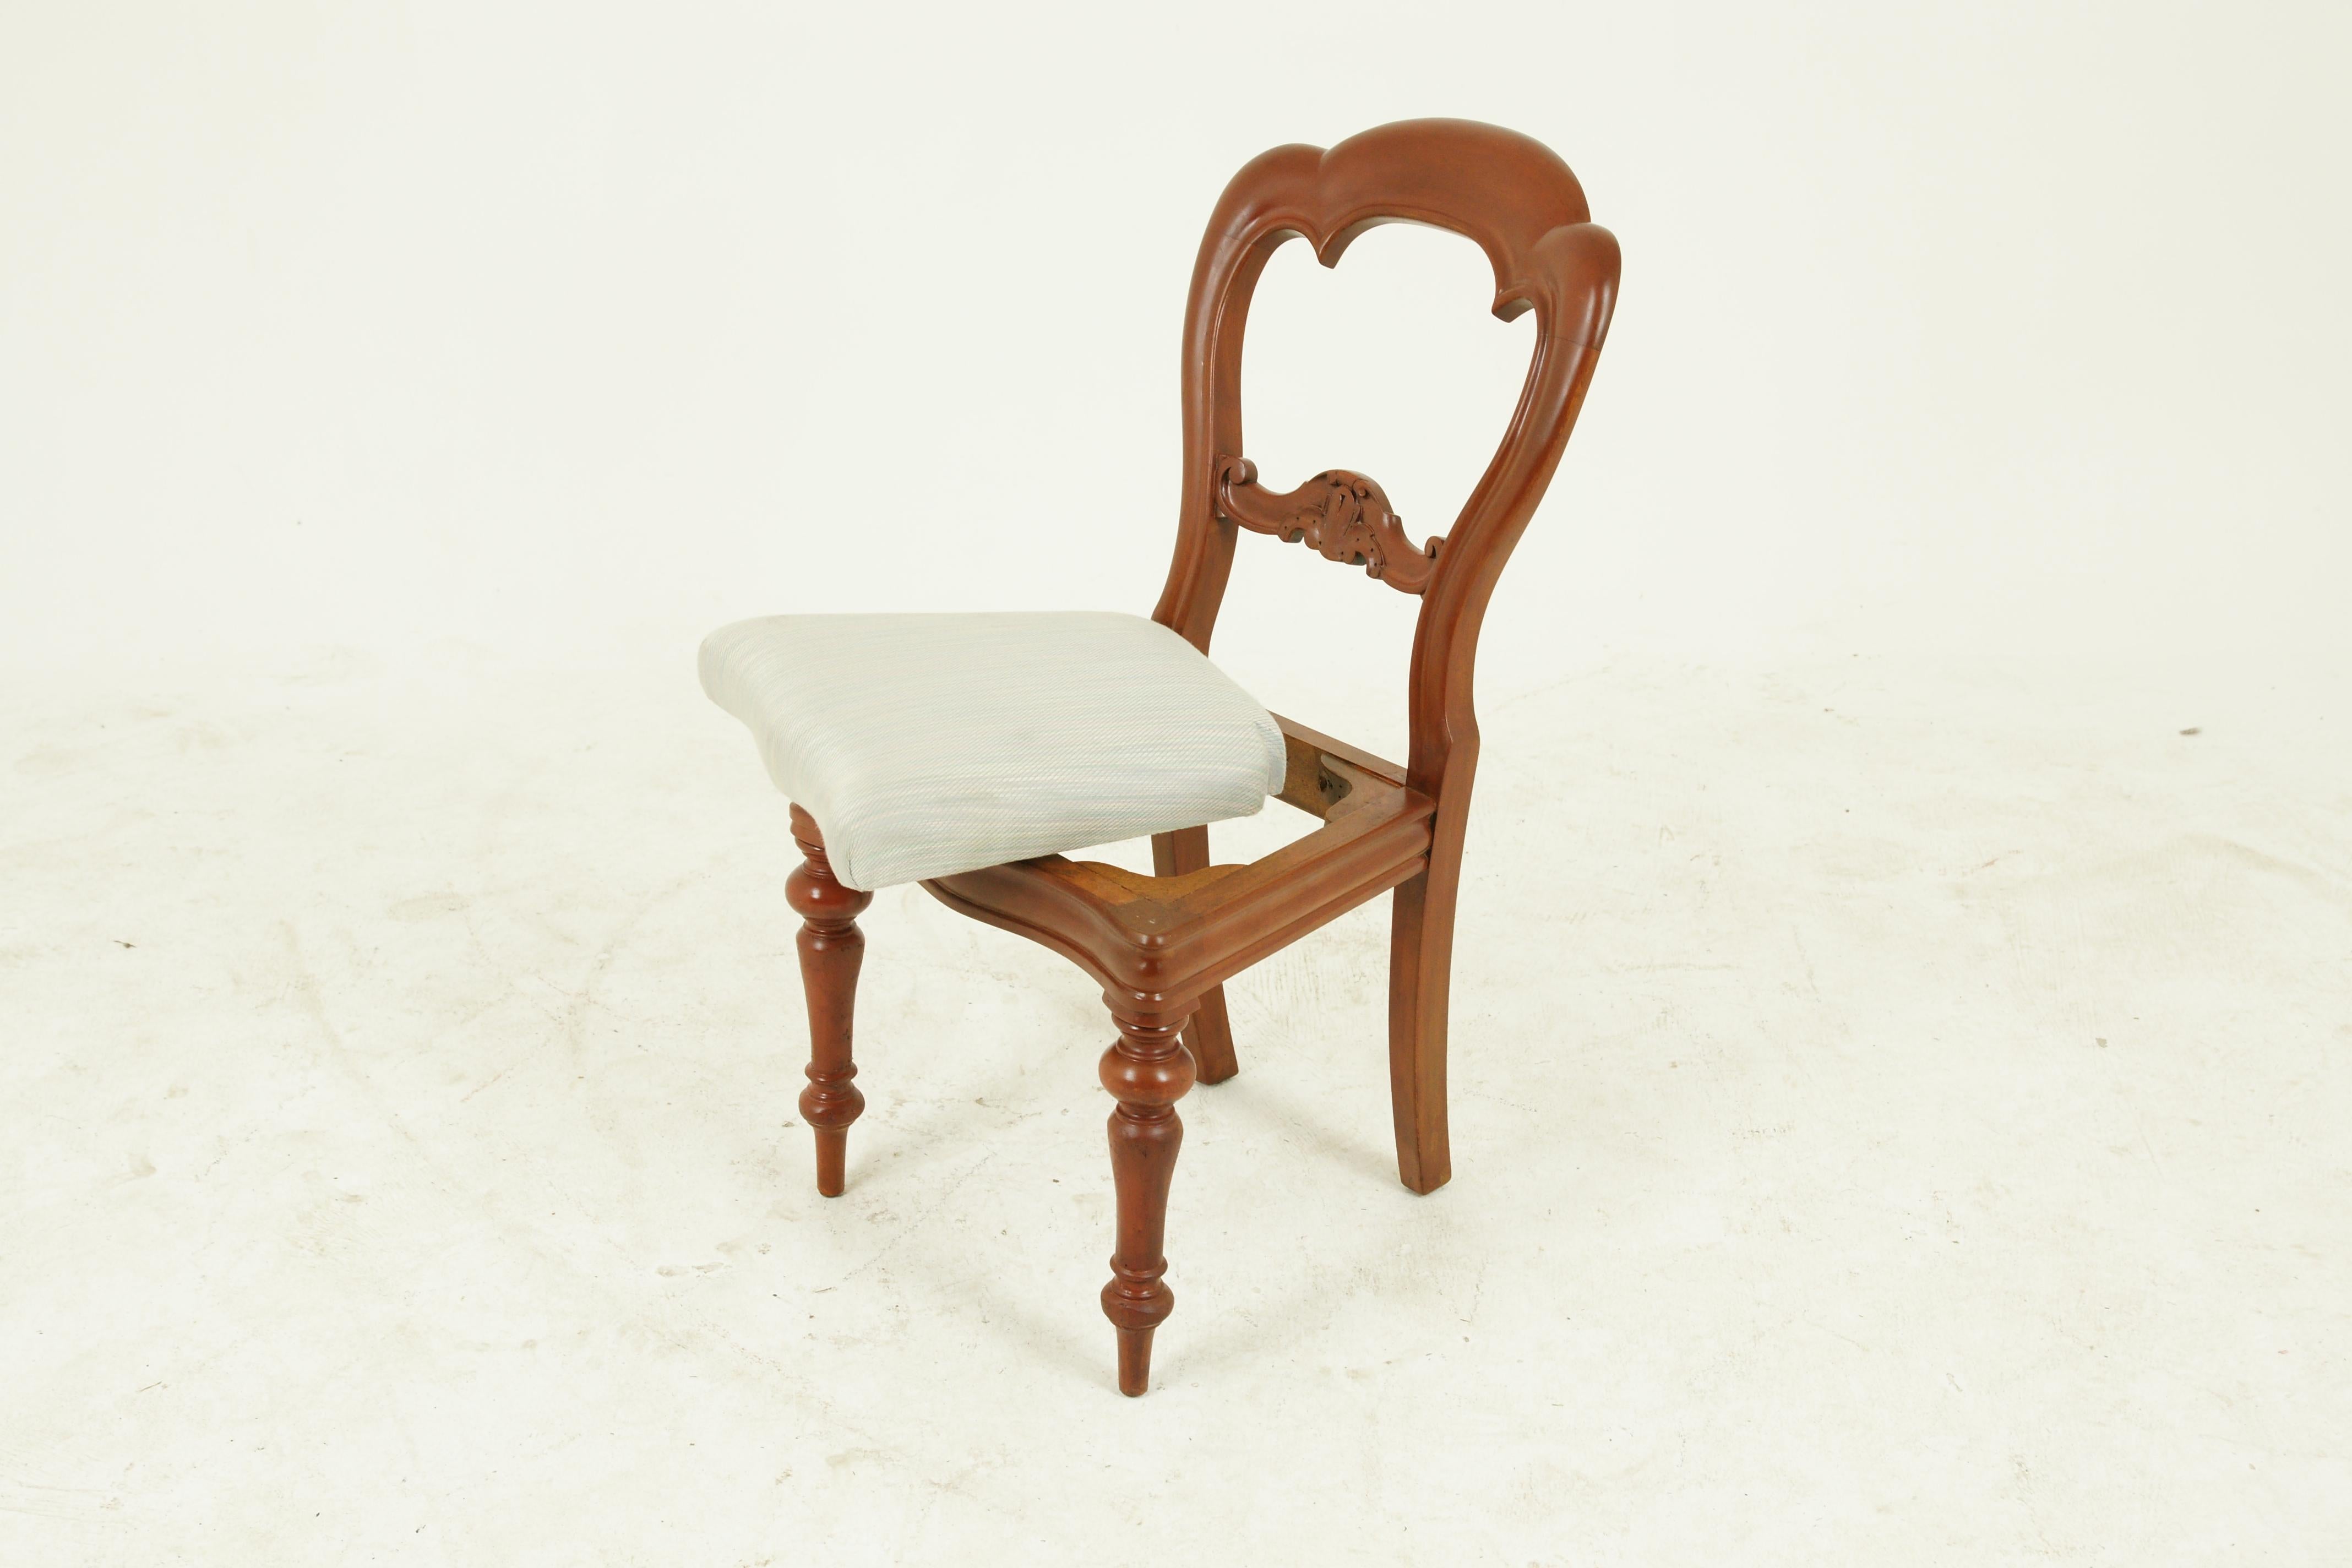 Scottish Antique Dining Chairs, Balloon Back Chairs, Walnut, Victorian, 1880, B1541